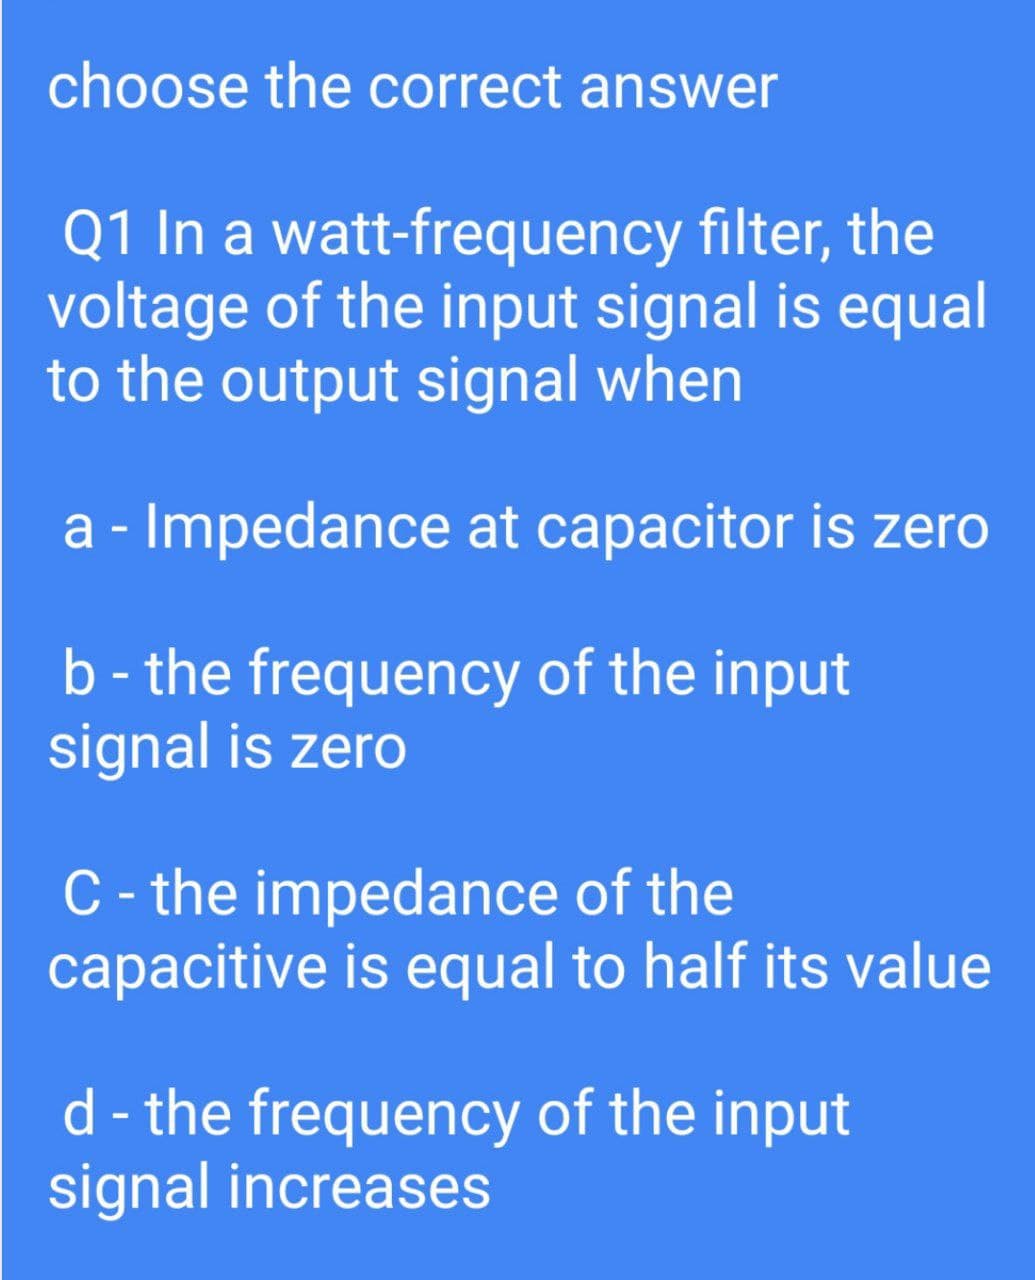 choose the correct answer
Q1 In a watt-frequency filter, the
voltage of the input signal is equal
to the output signal when
a - Impedance at capacitor is zero
b - the frequency of the input
signal is zero
C- the impedance of the
capacitive is equal to half its value
d - the frequency of the input
signal increases
